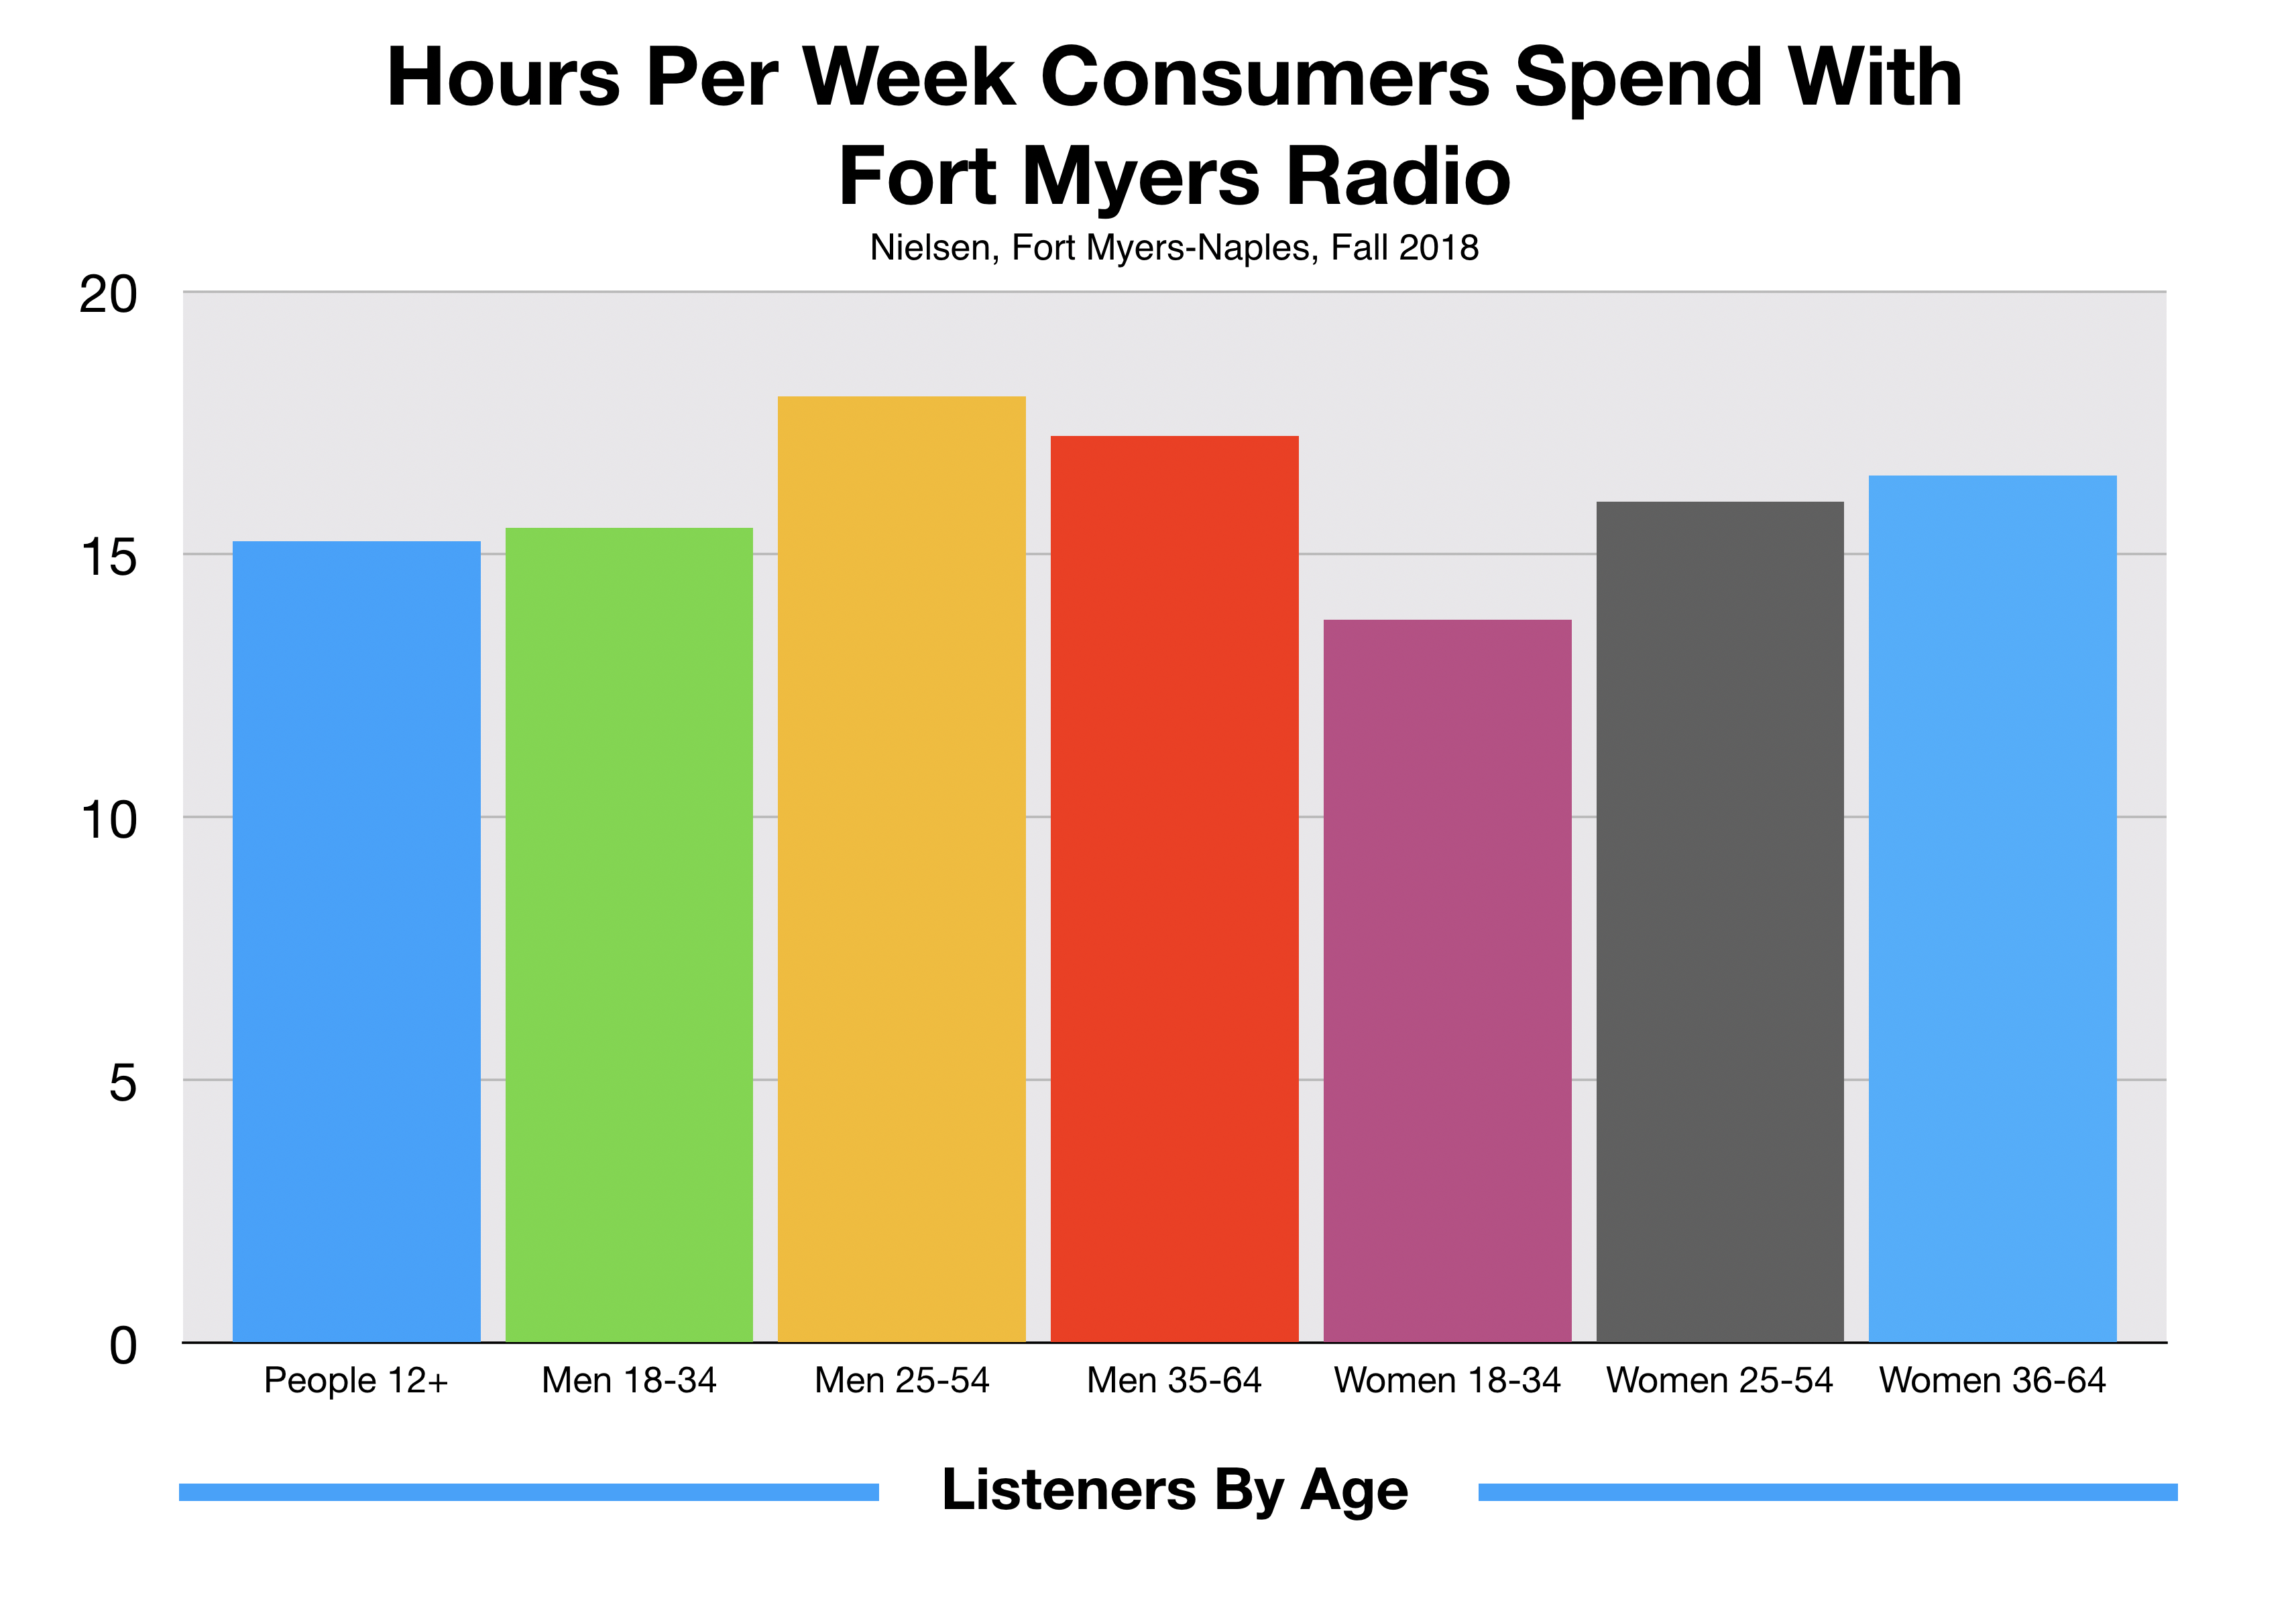 SWFL Consumers Spend 15 Hours Per Week Listening To Fort Myers Radio